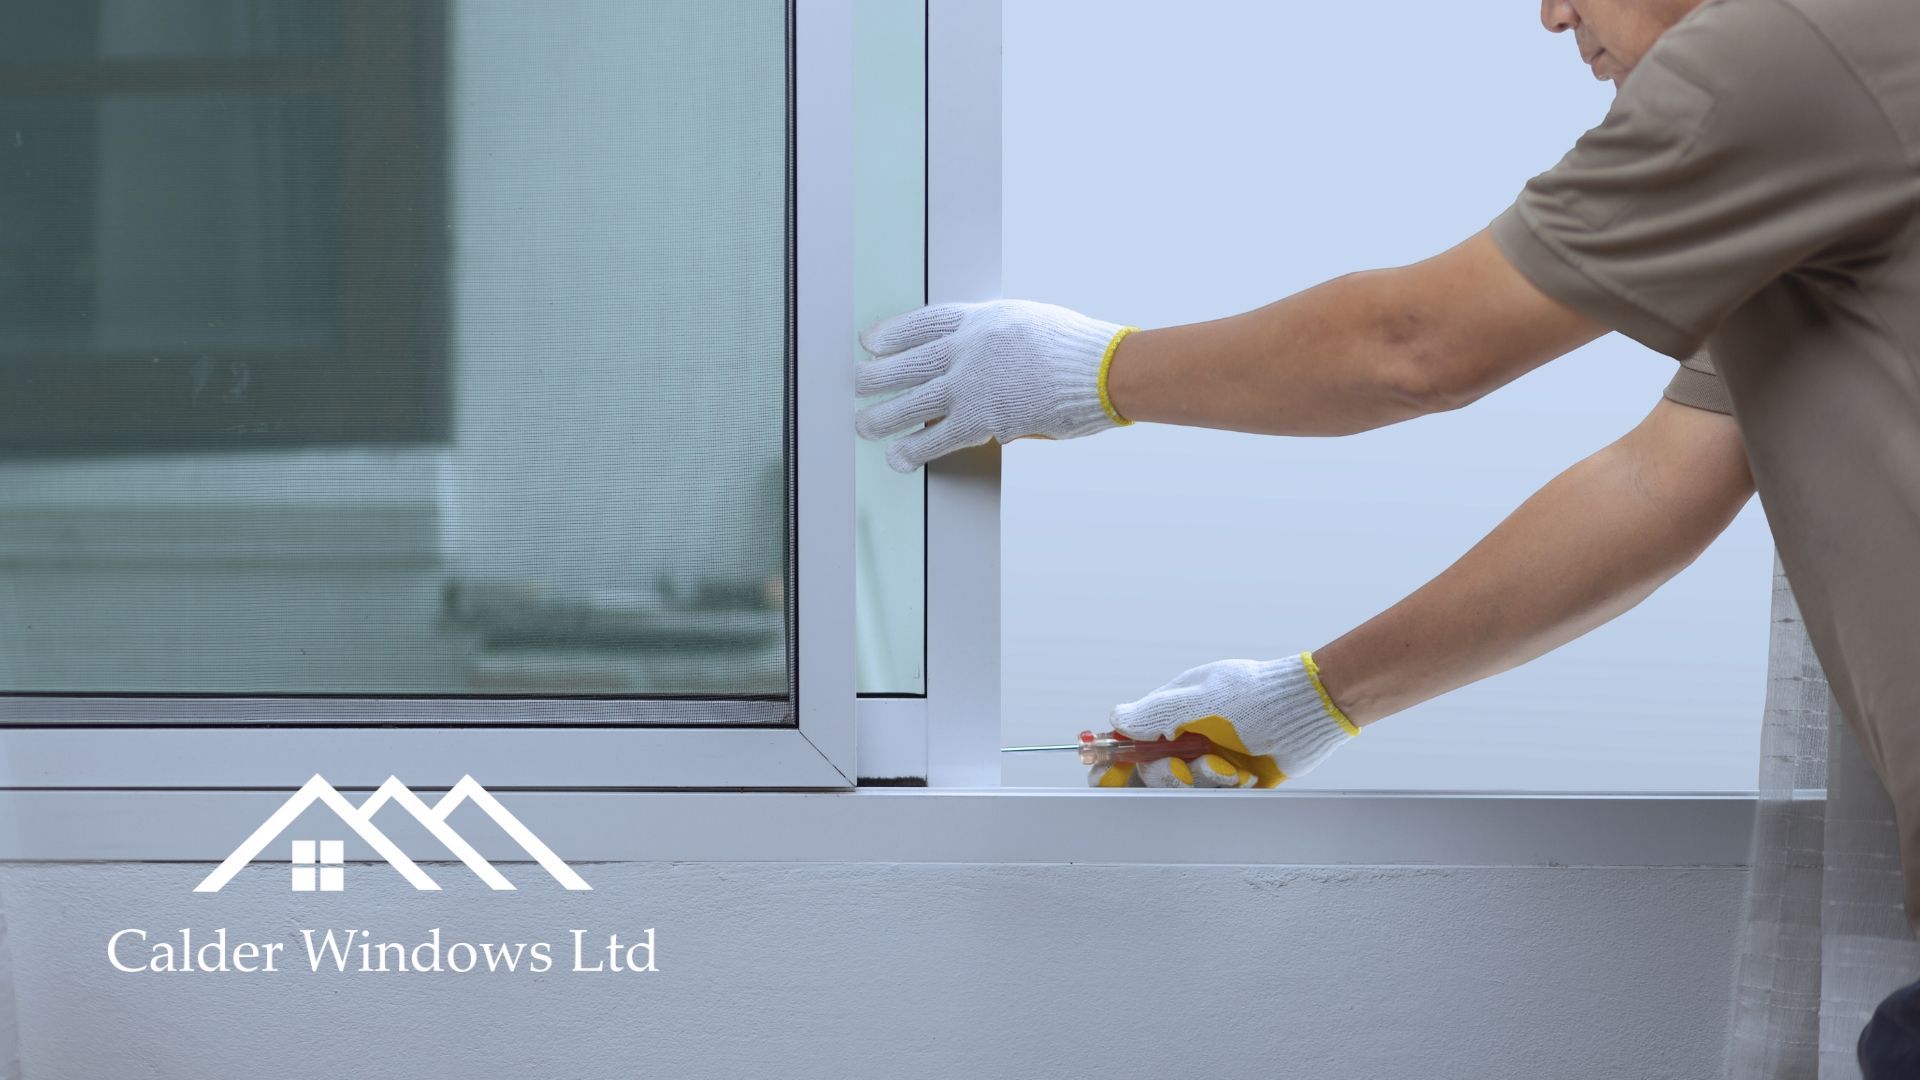 We always deliver an honest service – but do other firms? Learn how to avoid common window scams.
